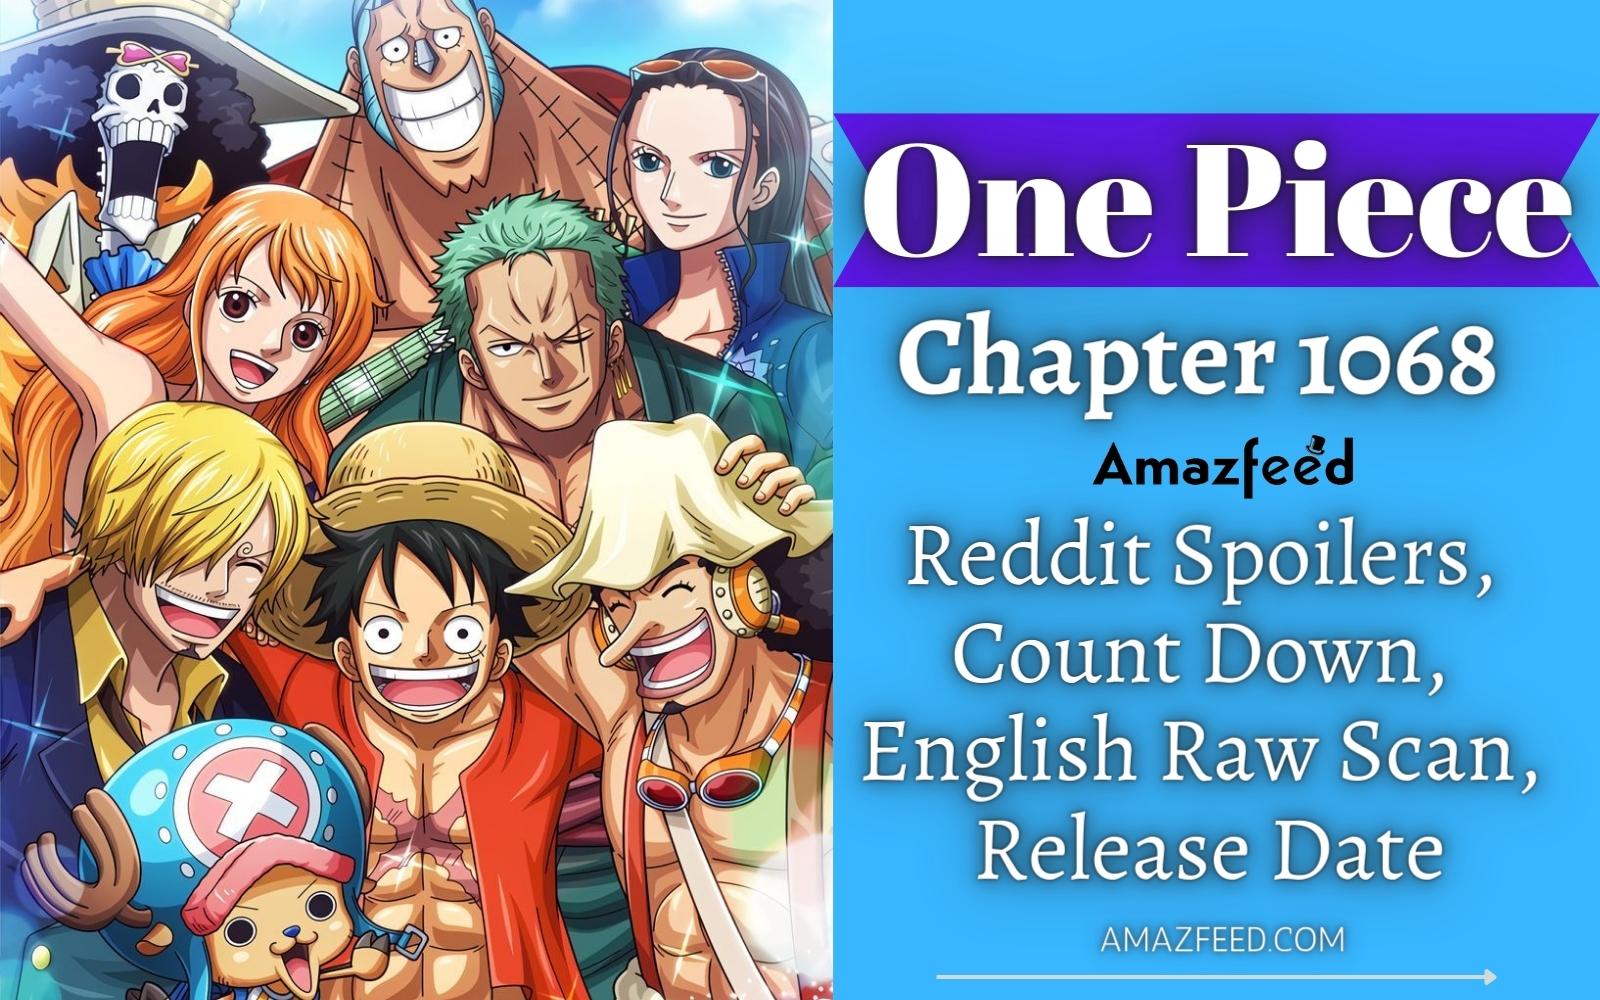 One Piece Chapter 1068 Reddit Spoilers, Count Down, English Raw Scan, Release Date, & Everything You Want to Know